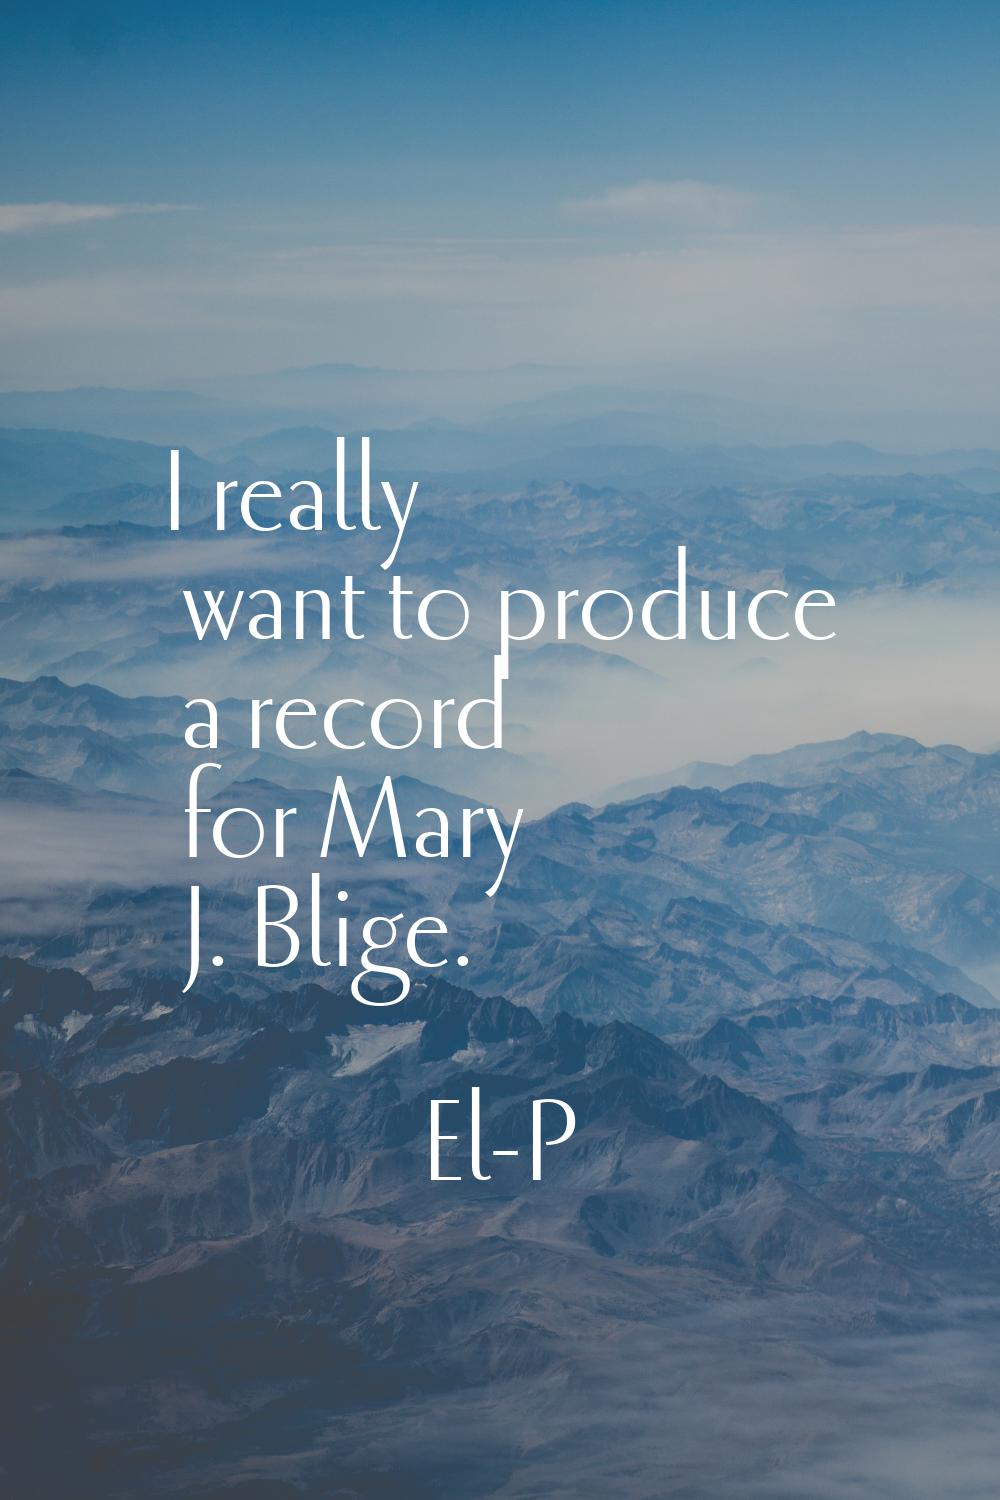 I really want to produce a record for Mary J. Blige.